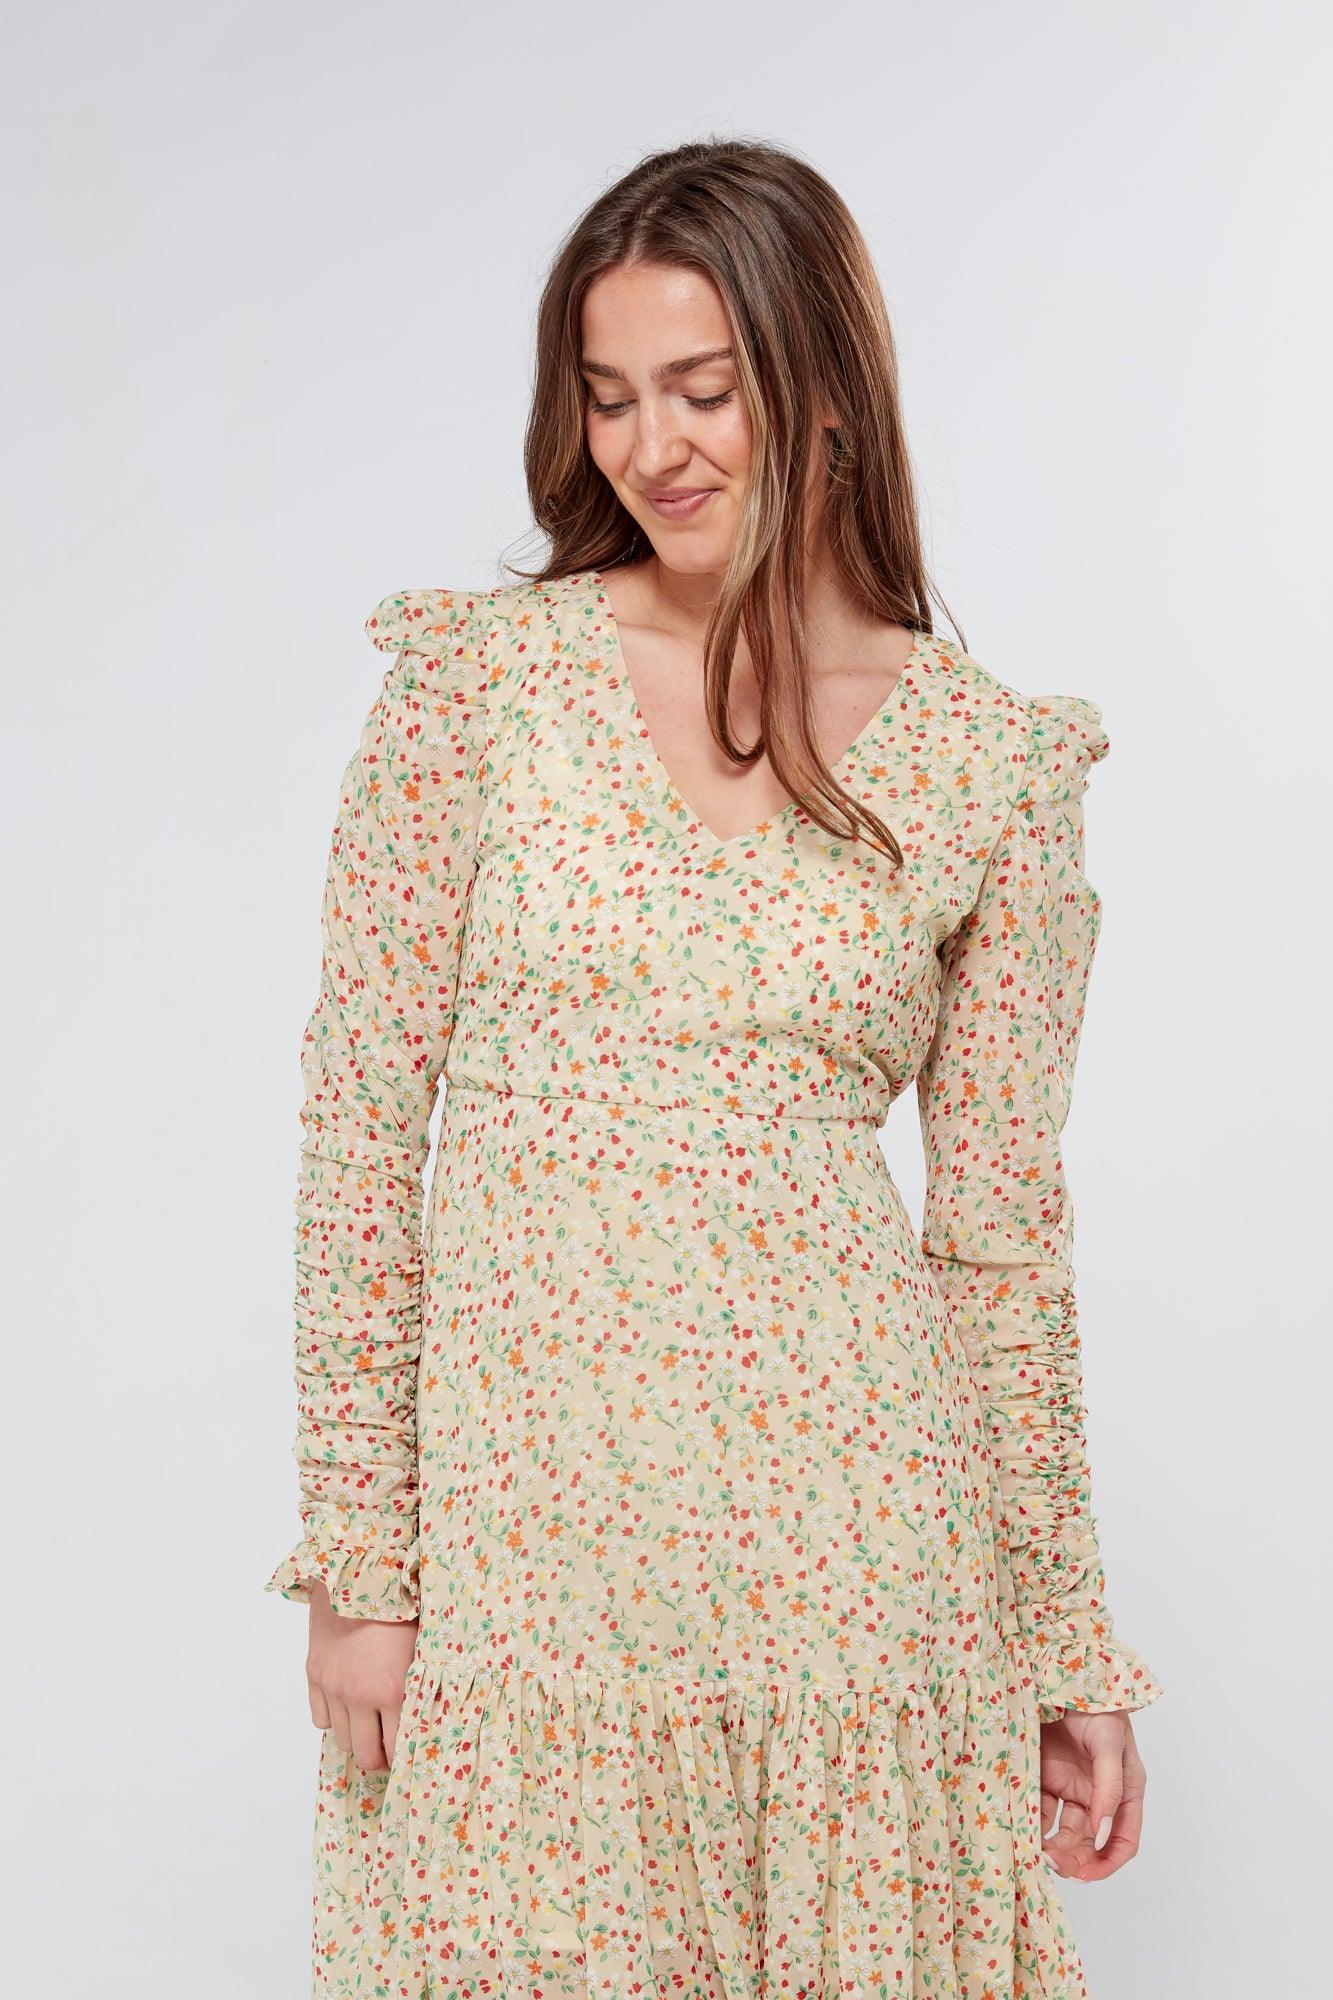 Introducing our Georgette beige floral midi dress, the perfect addition to your wardrobe for any special occasion. The dress features a stunning floral print on a beige georgette fabric that flows beautifully into a big frill. The design is nicely fitted on the waist and hips, creating a flattering silhouette, and then flowing into a frill for a feminine touch.